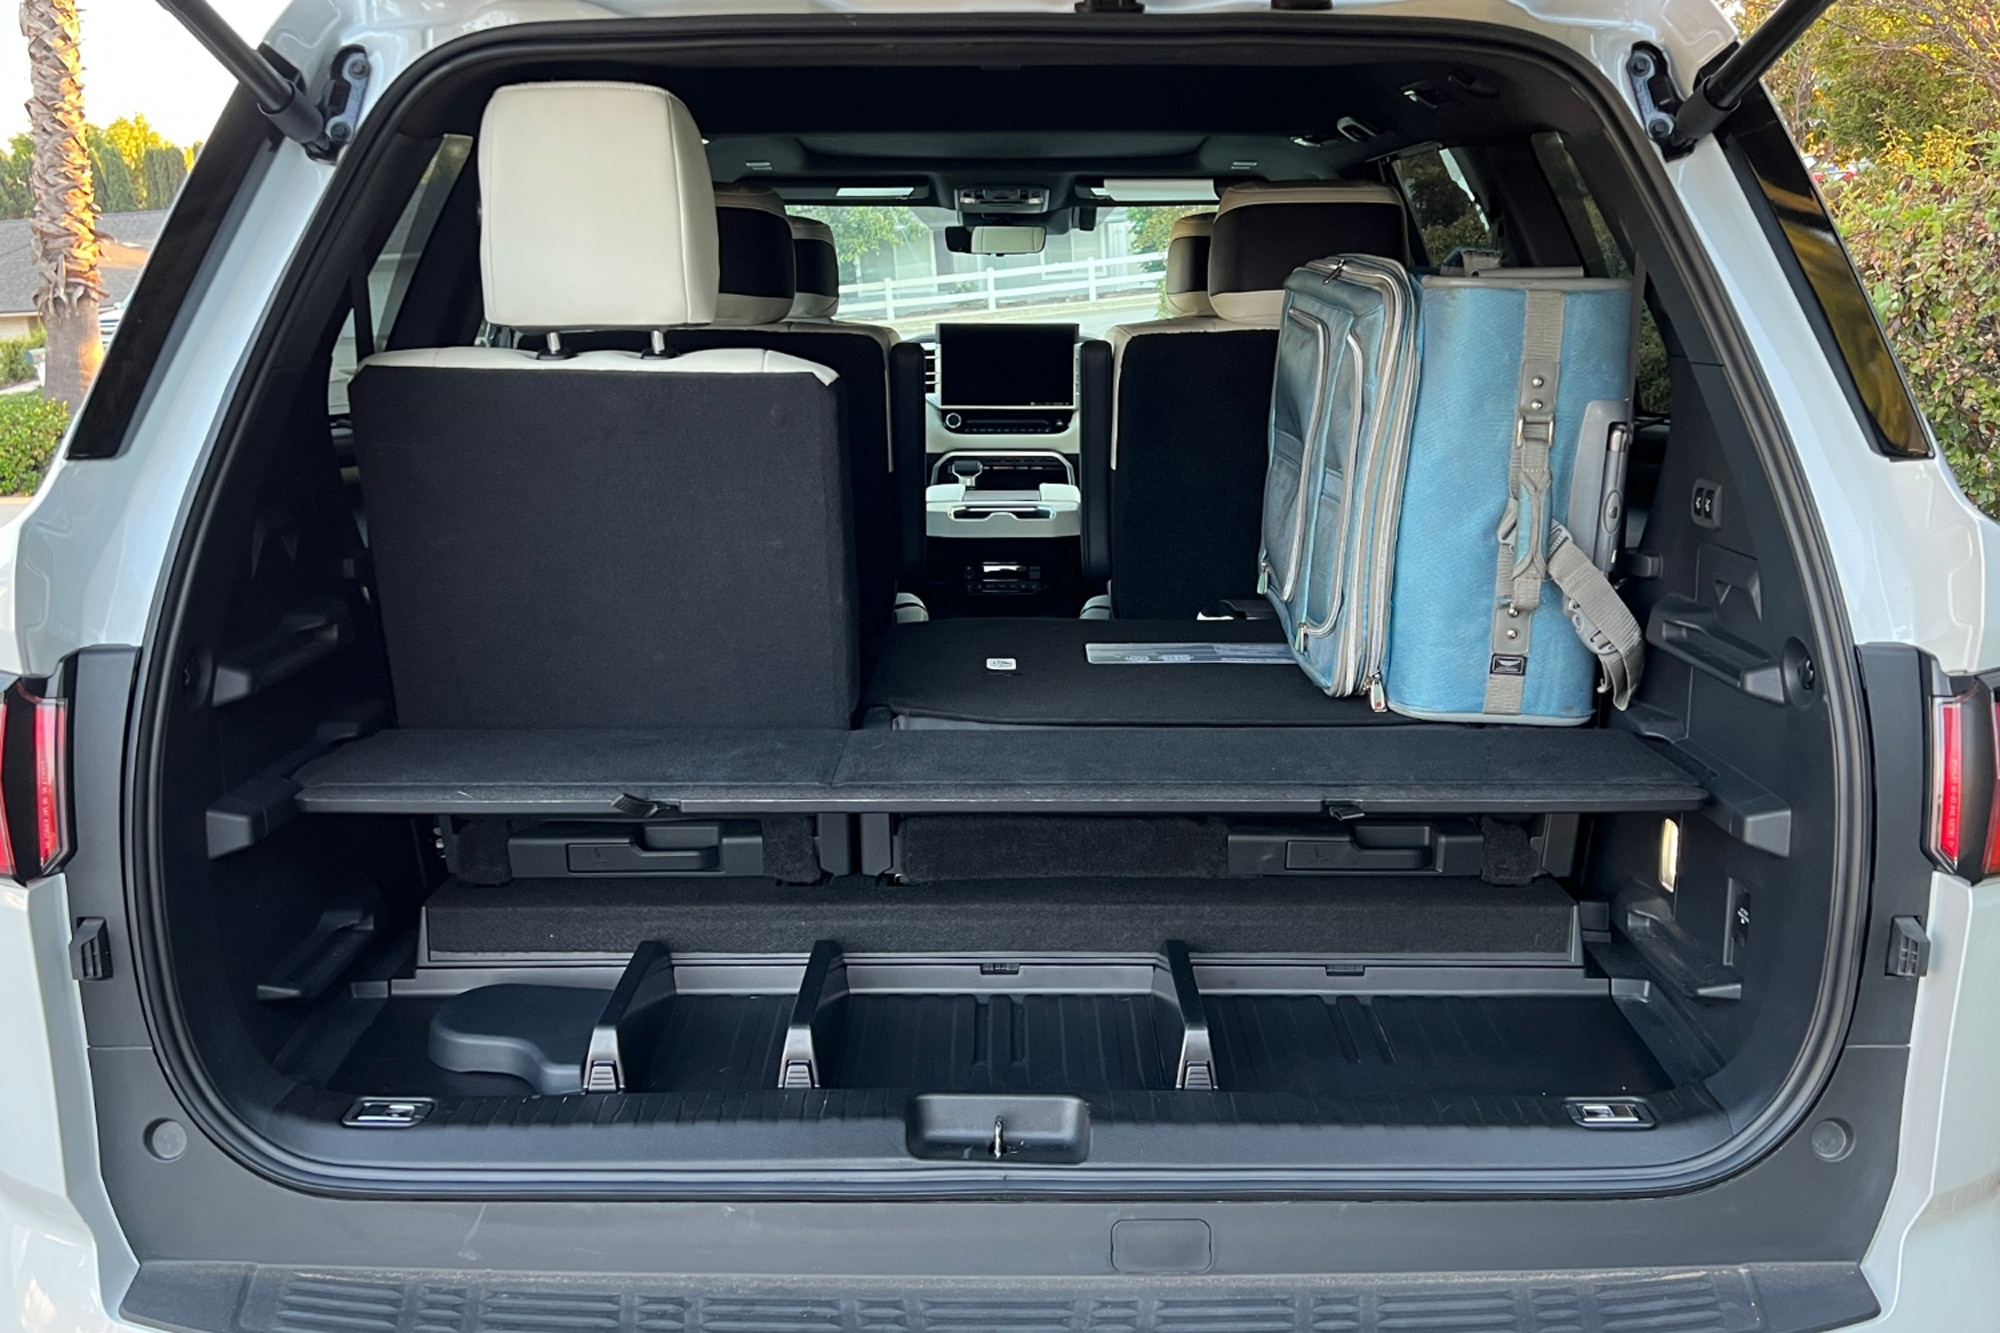 2023 Toyota Sequoia cargo space with luggage inside